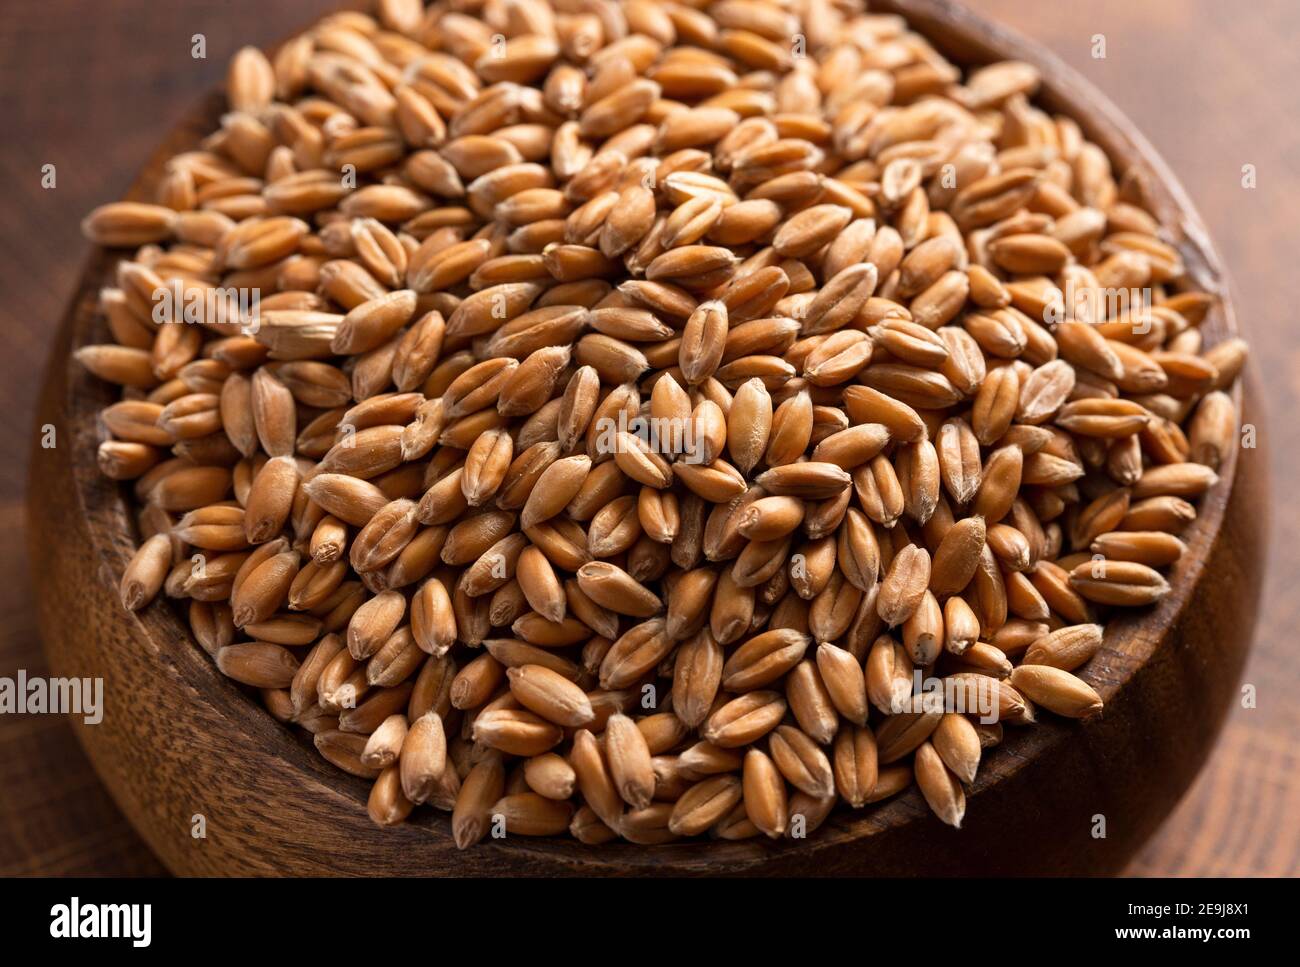 A Bowl of Spelt Grain on a Wooden Butchers Block Stock Photo